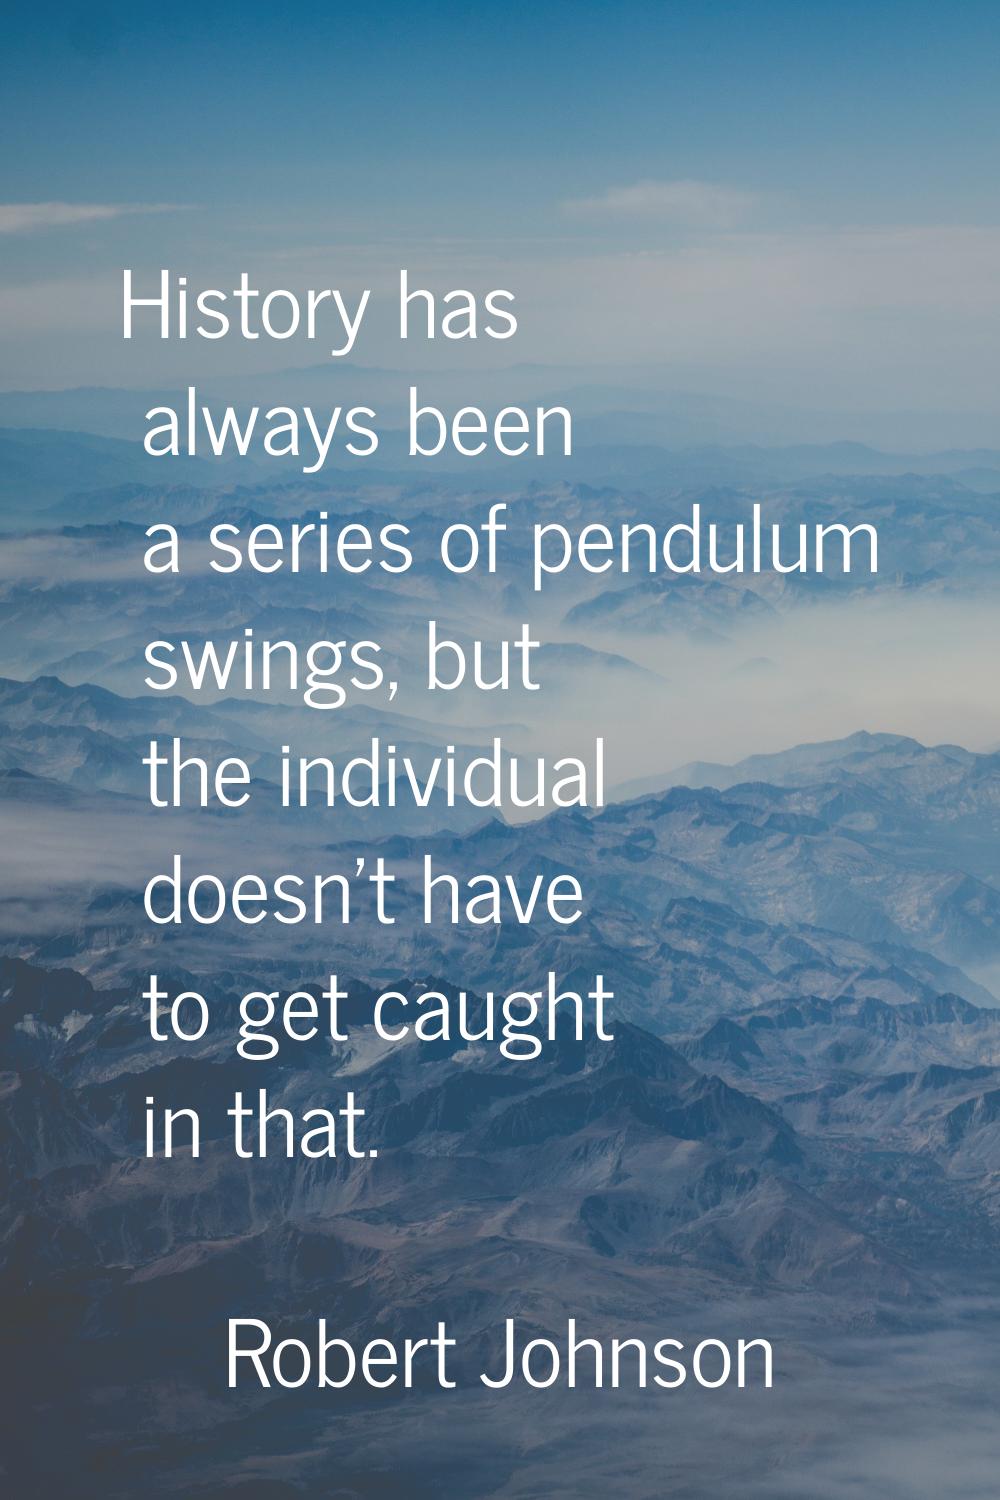 History has always been a series of pendulum swings, but the individual doesn't have to get caught 